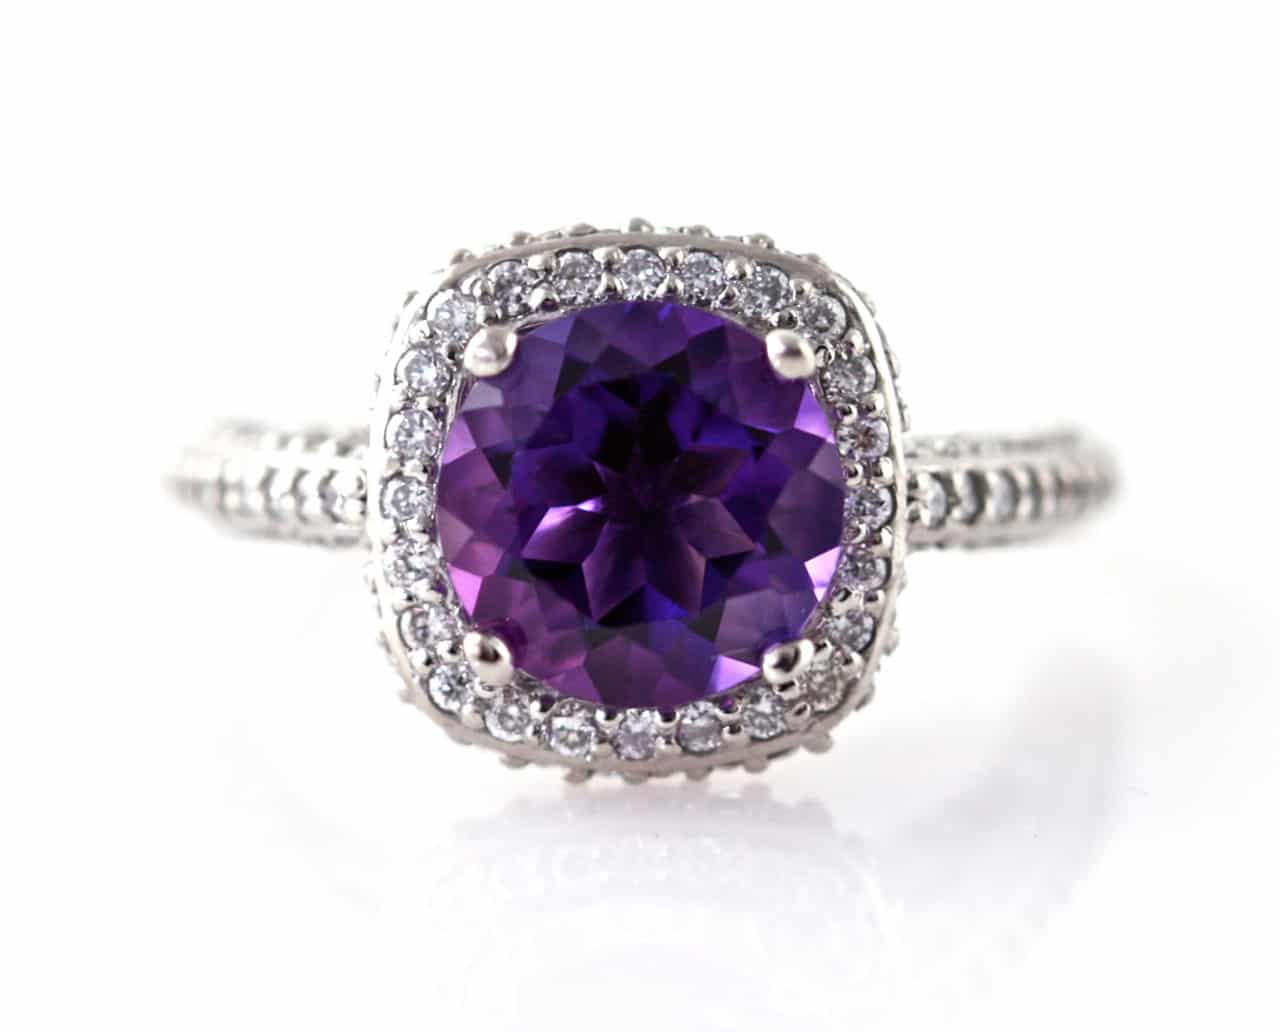 Engagement Rings made from Amethyst